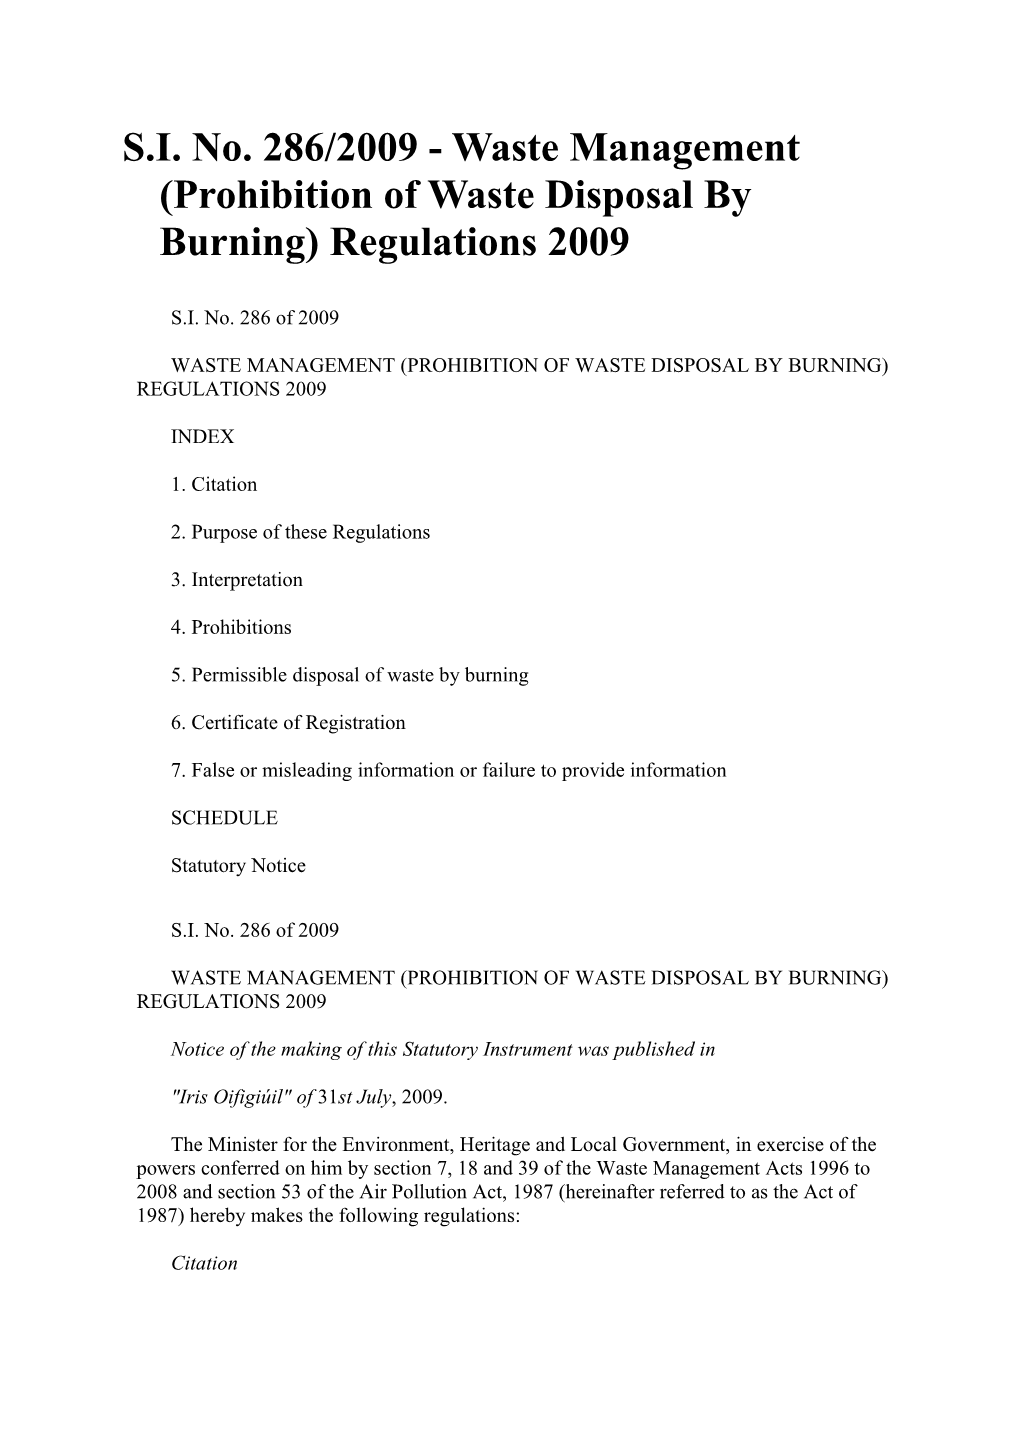 S.I. No. 286/2009 - Waste Management (Prohibition of Waste Disposal by Burning) Regulations 2009